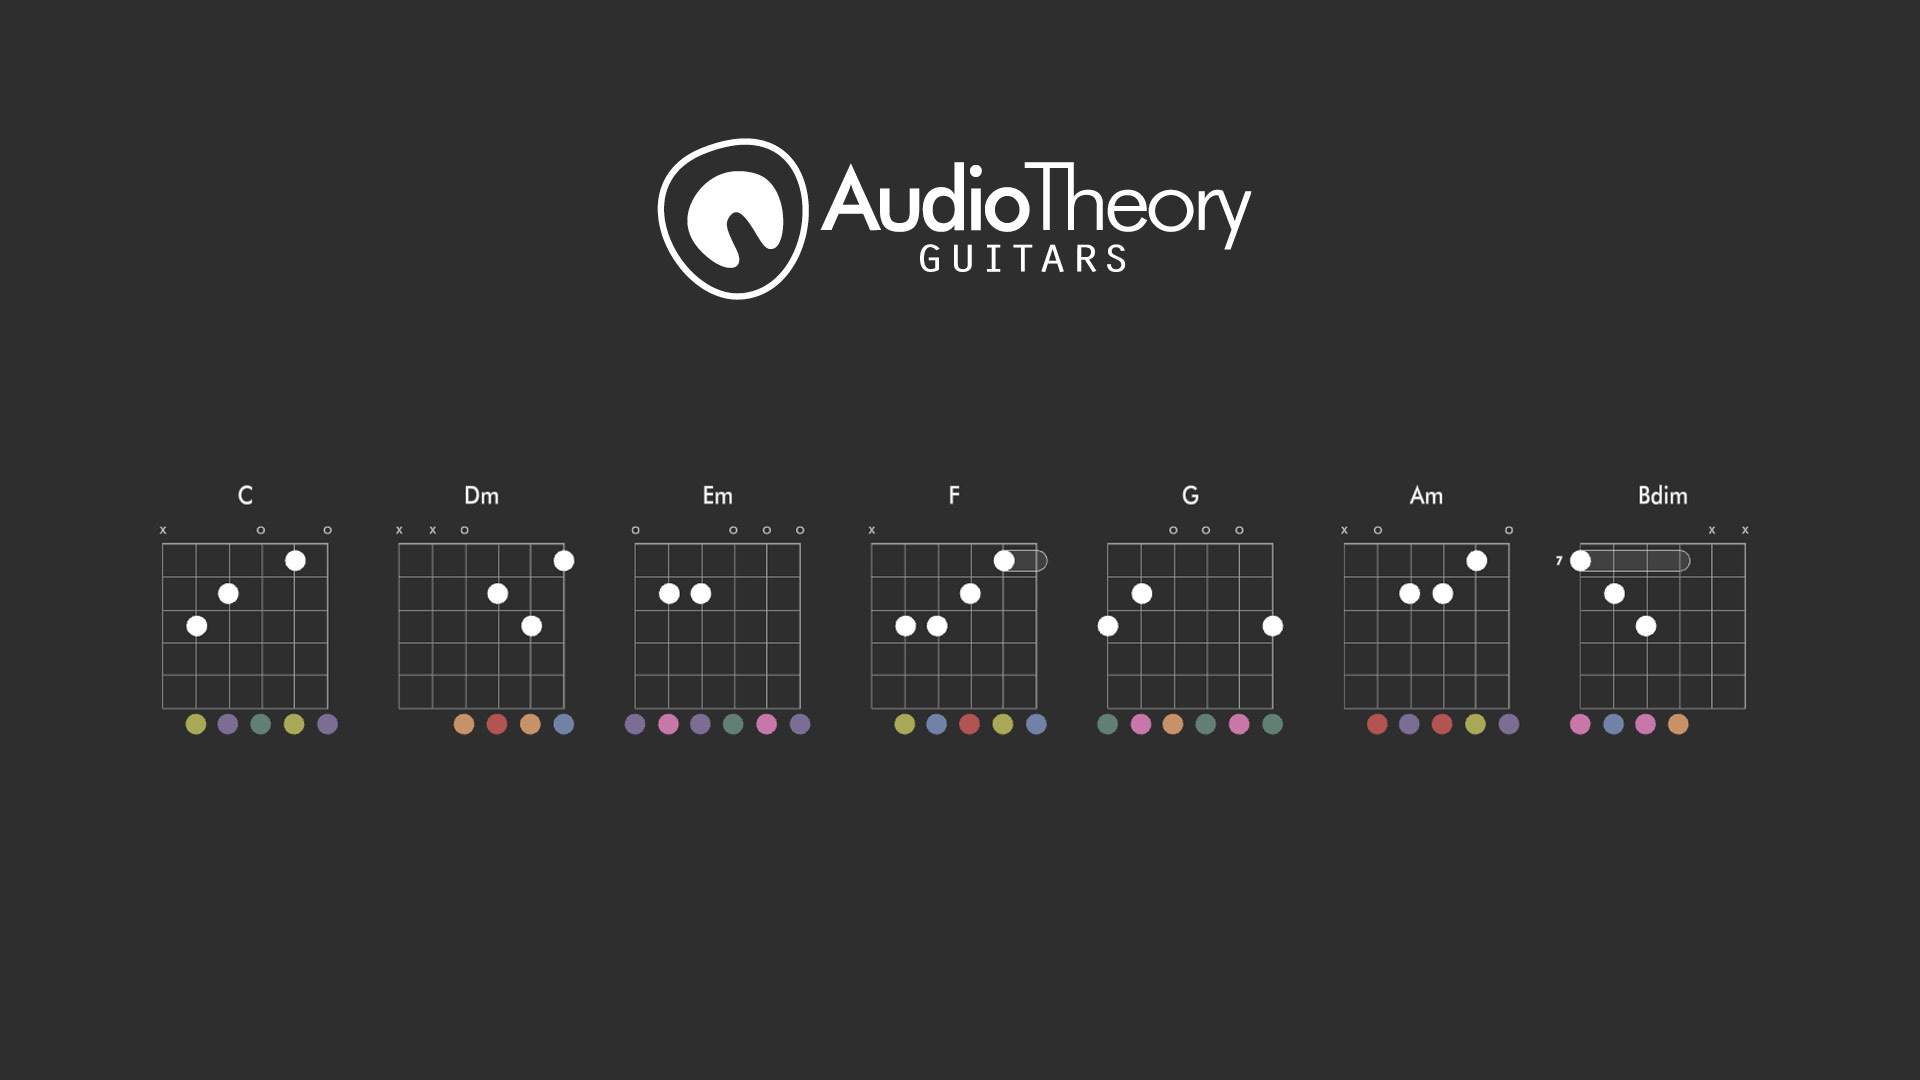 AudioTheory Auto Load Chords